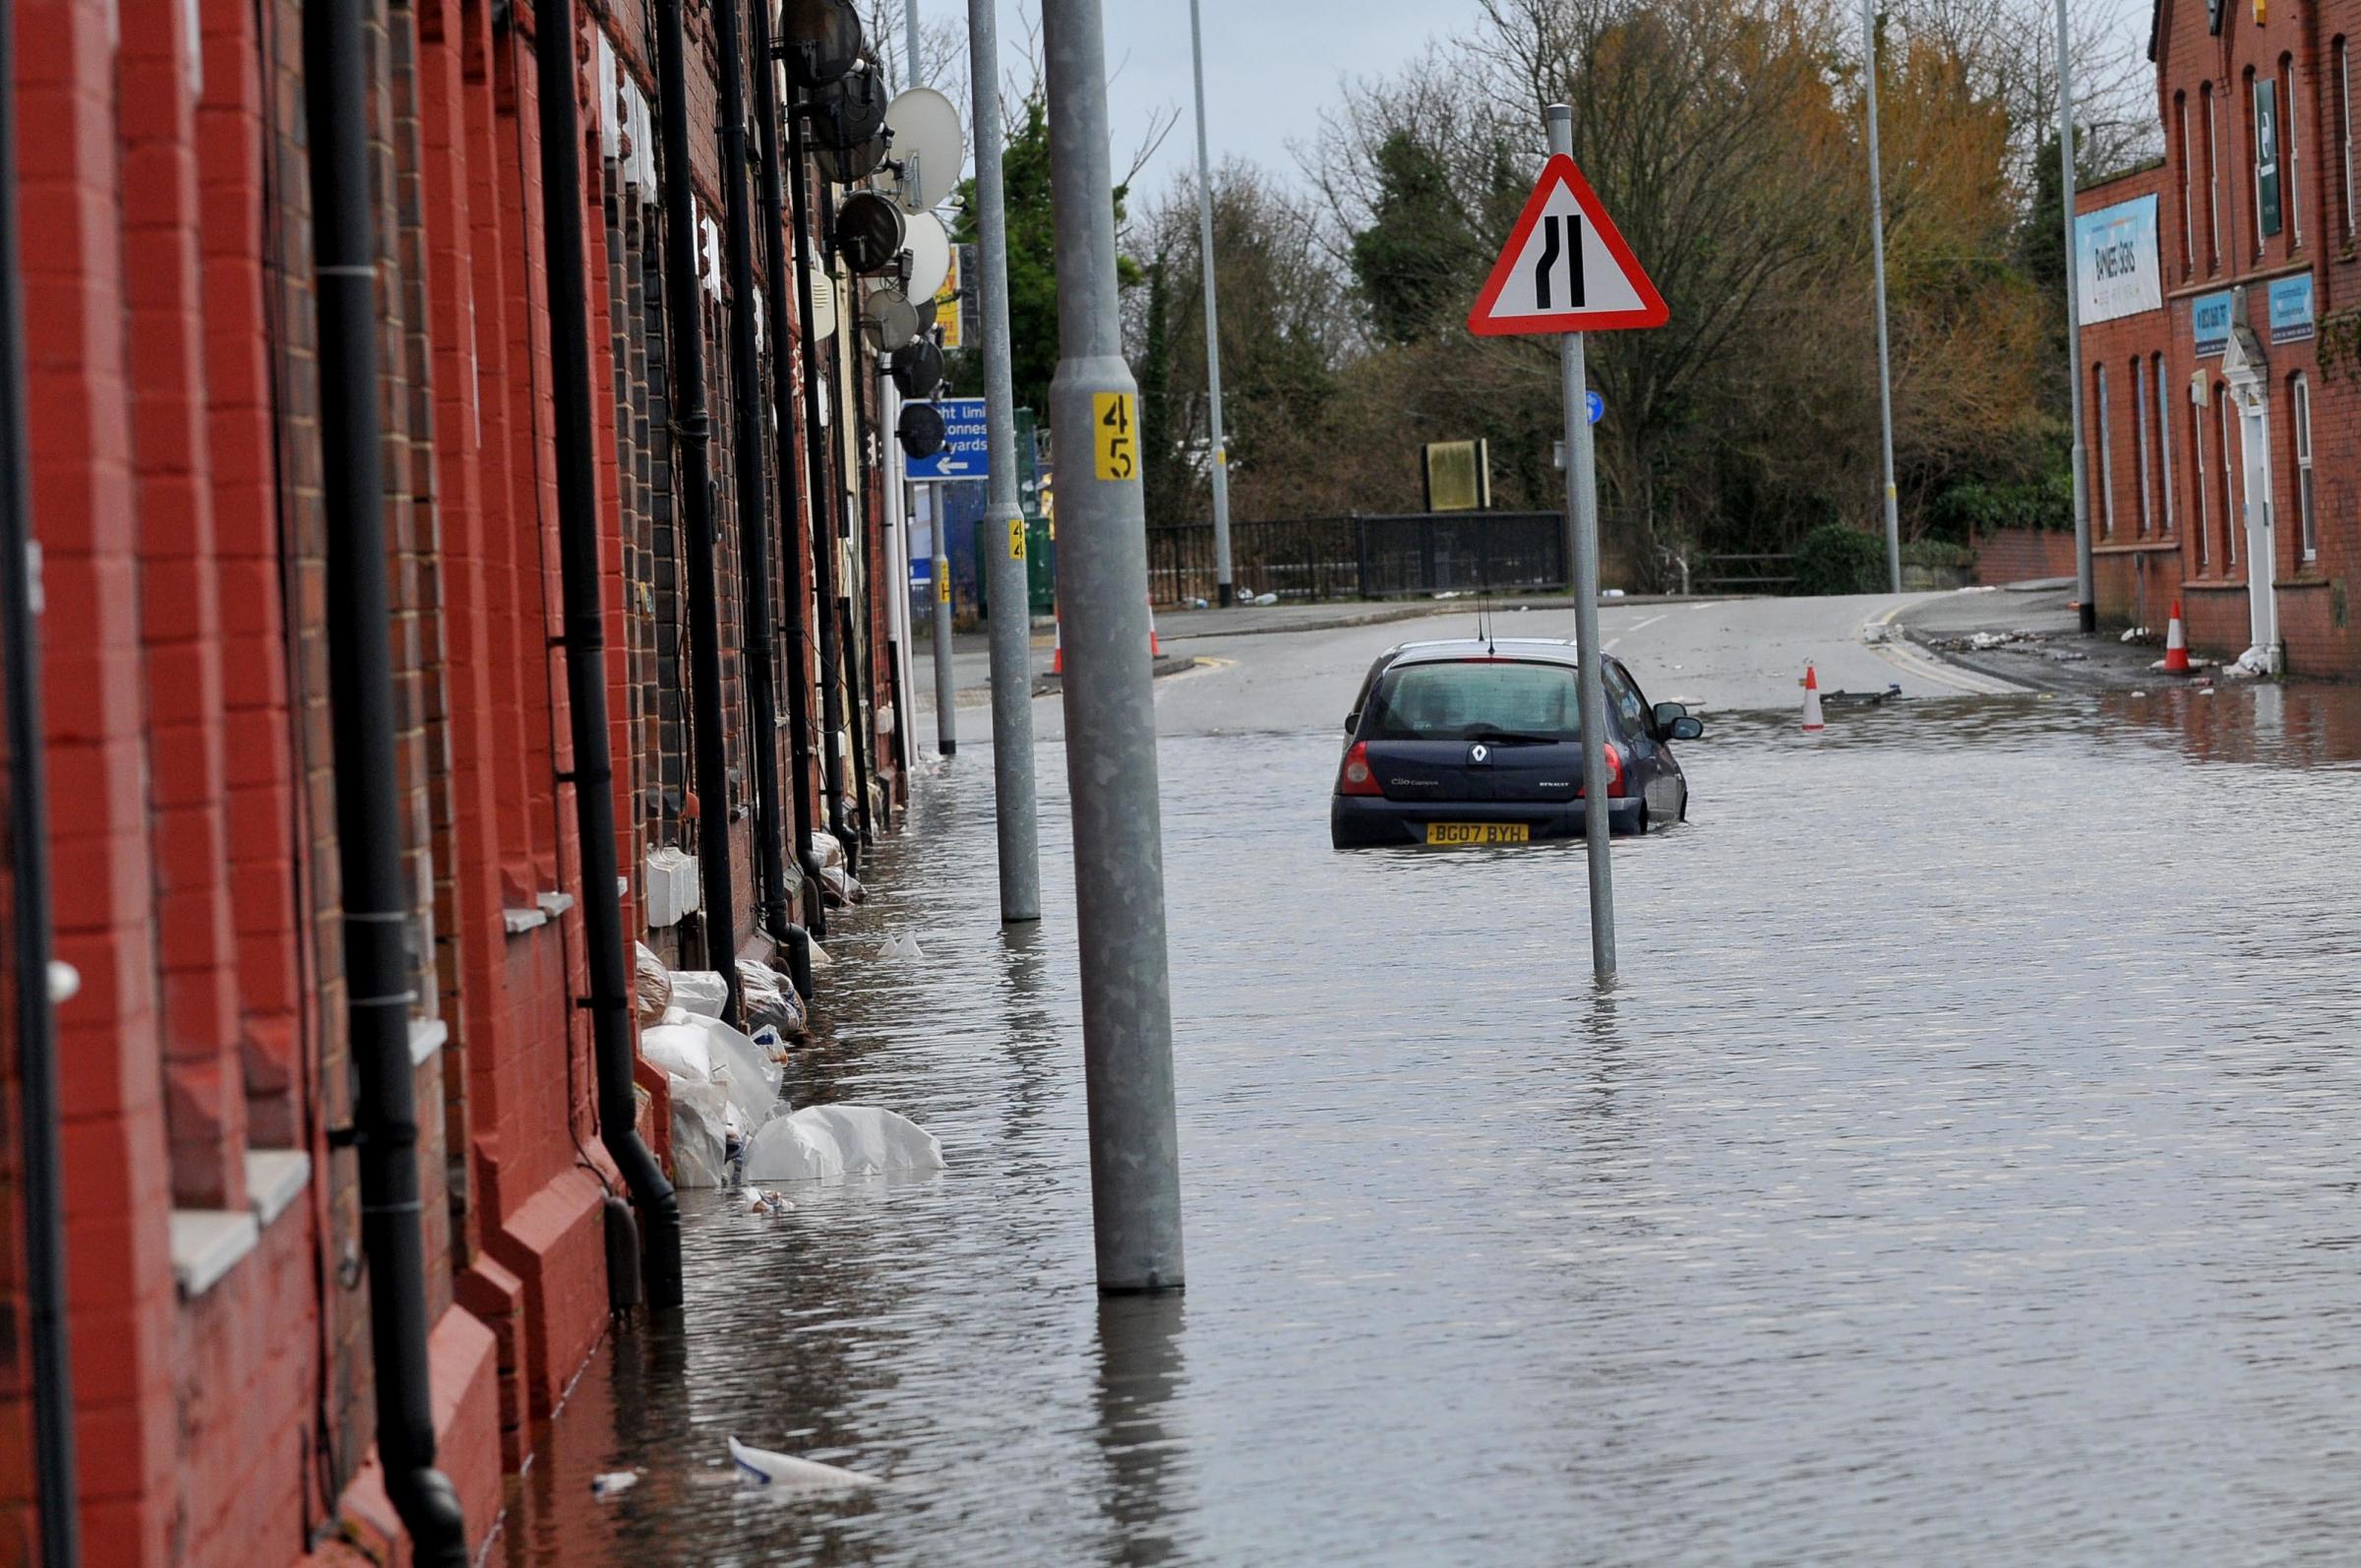 Warrington was hit with severe flooding in January this year (Image: Dave Gillespie)